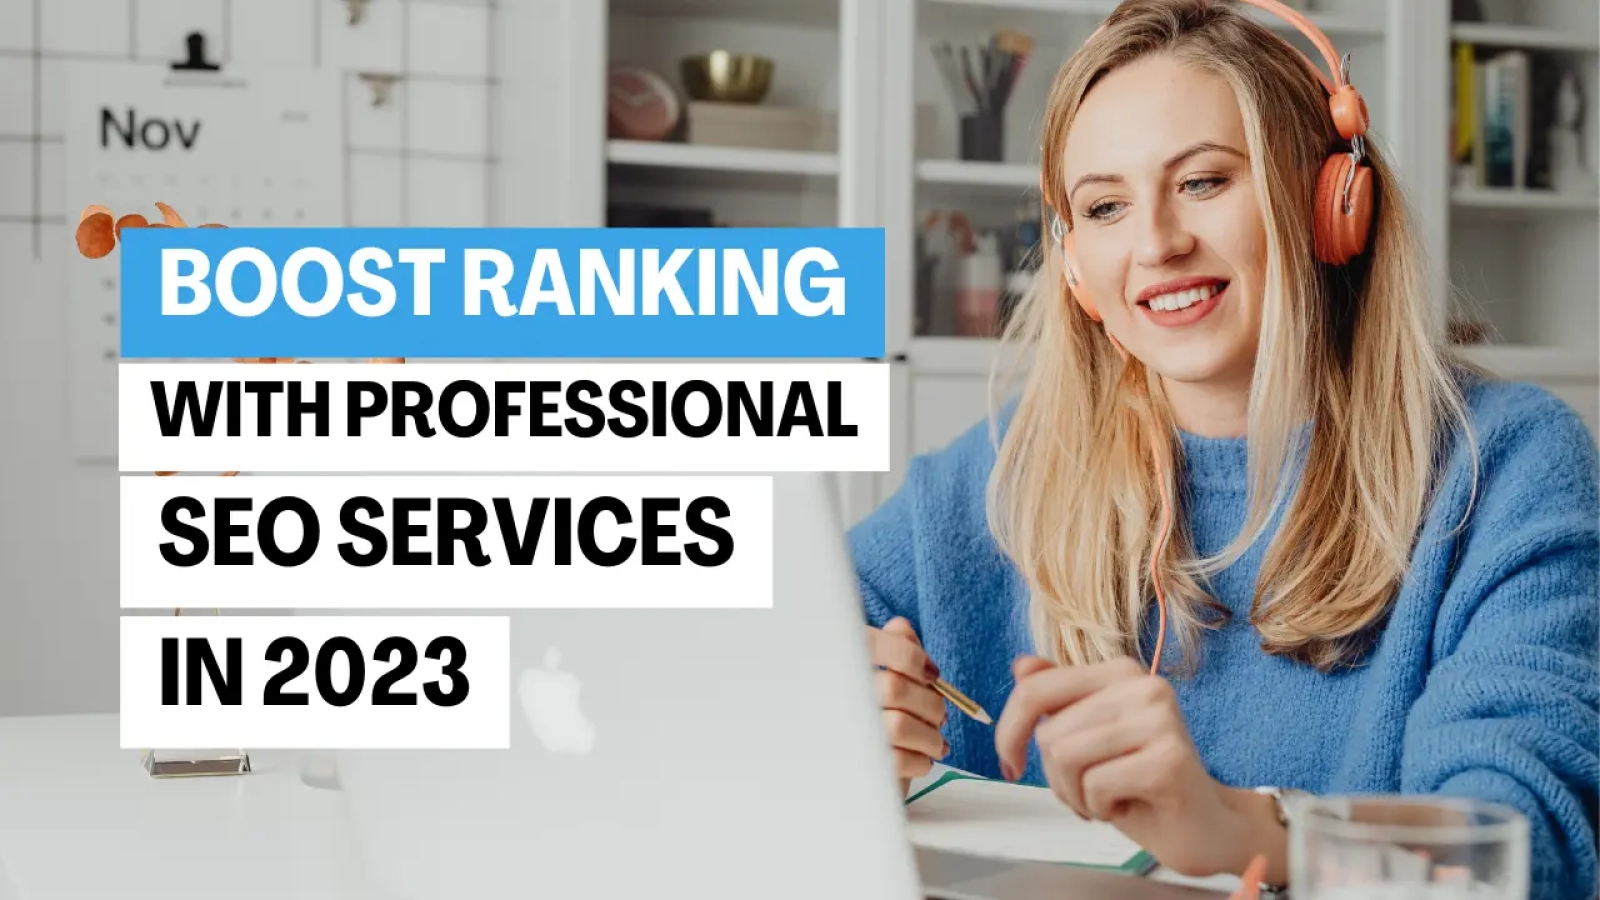 Guide to Boost Your Rankings with Professional SEO Services